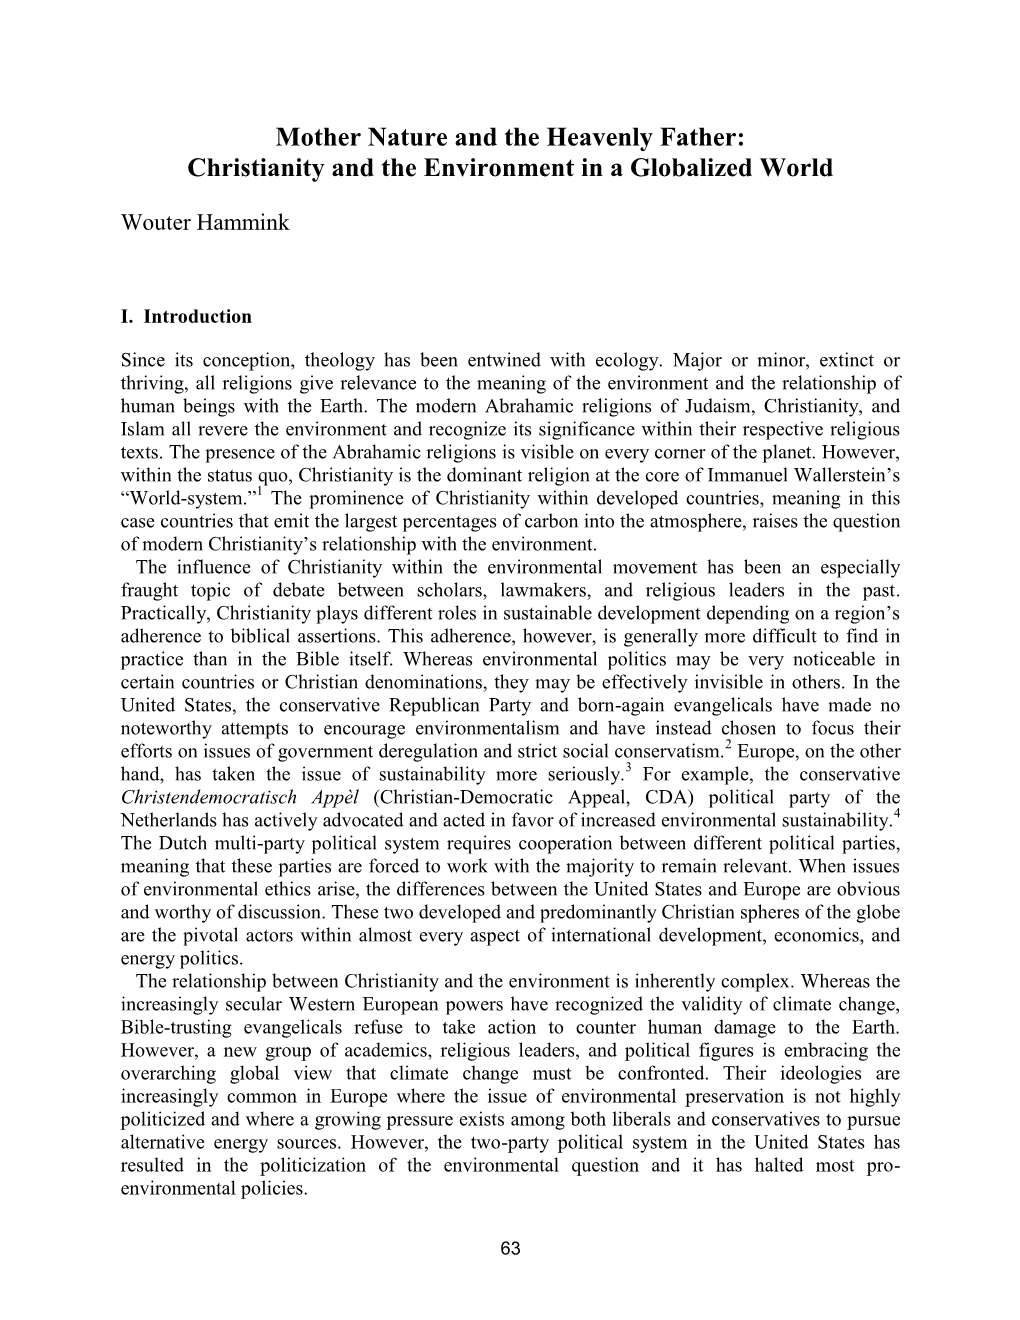 Christianity and the Environment in a Globalized World